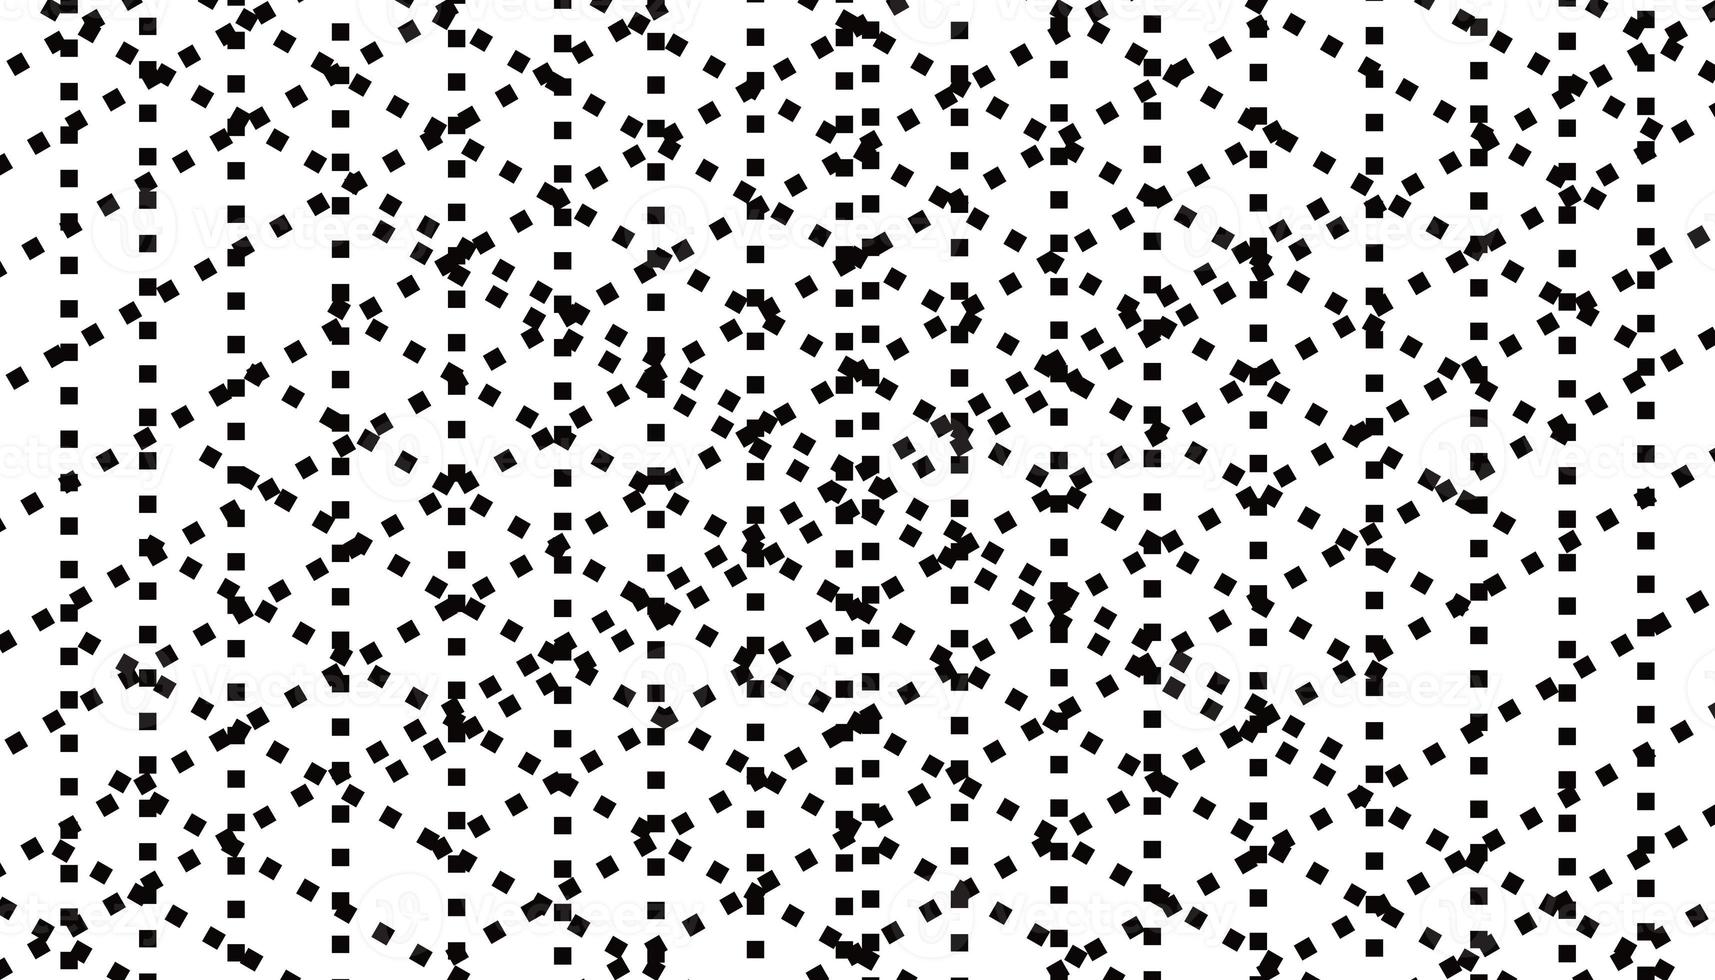 Abstract illustration background with black spots photo